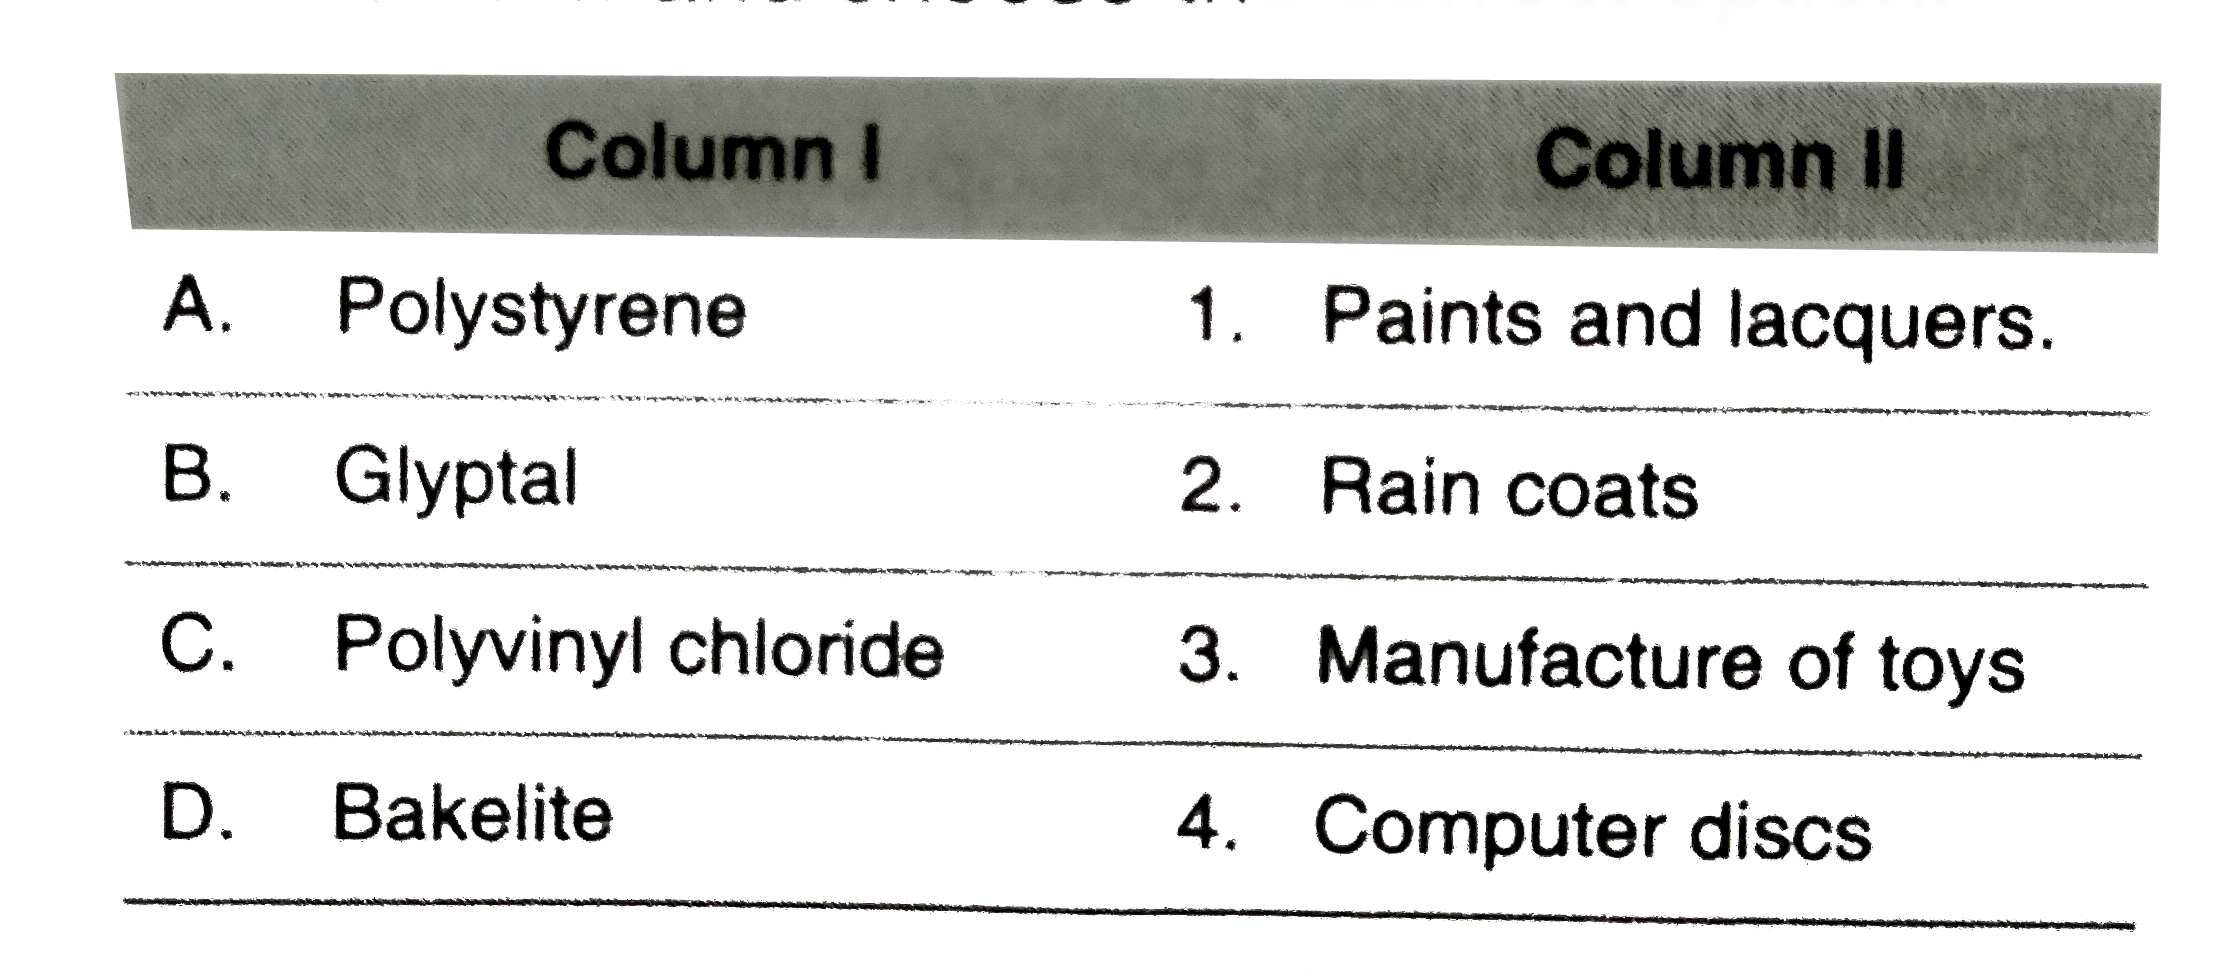 Match the polymers in Column I with their main  uses  in Column II and choose the correct option.